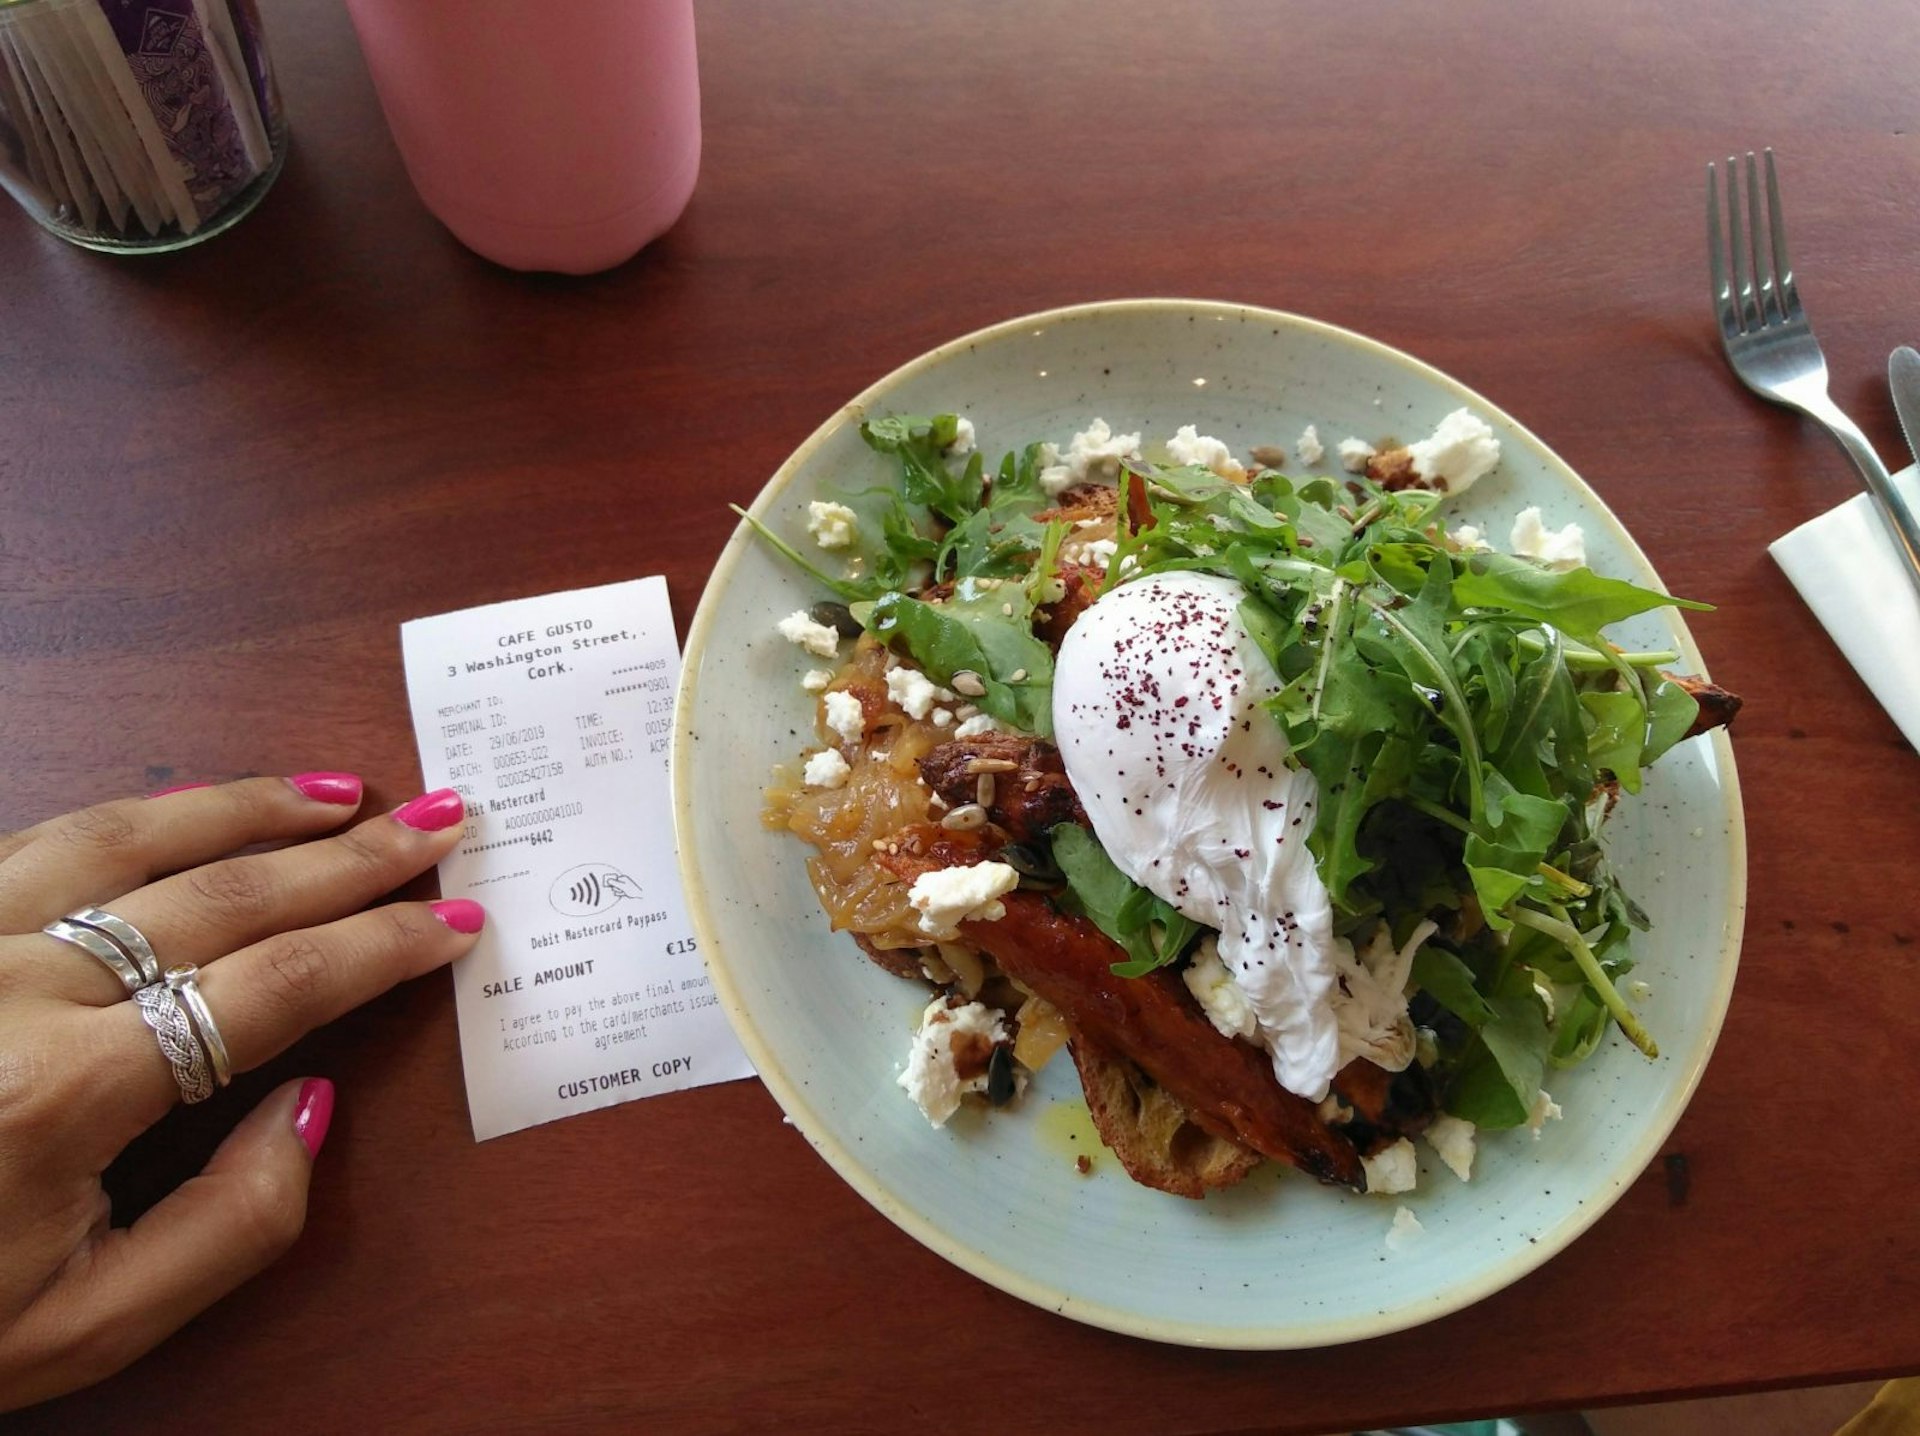 Poached egg, roasted sweet potato, caramelised onions and goats cheese on sourdough toast, with the receipt next to it. 